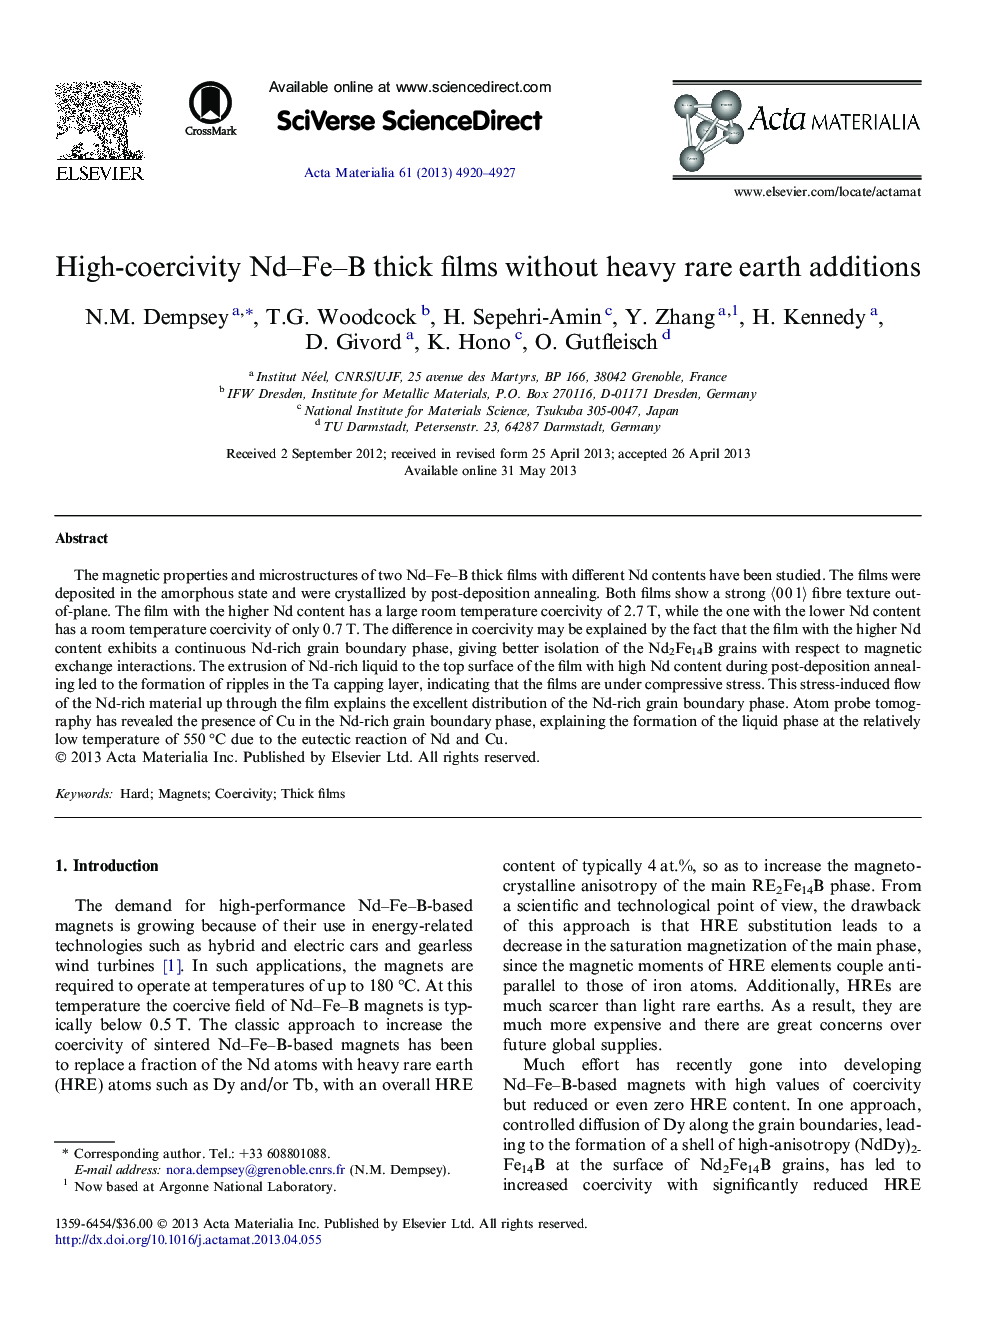 High-coercivity Nd–Fe–B thick films without heavy rare earth additions